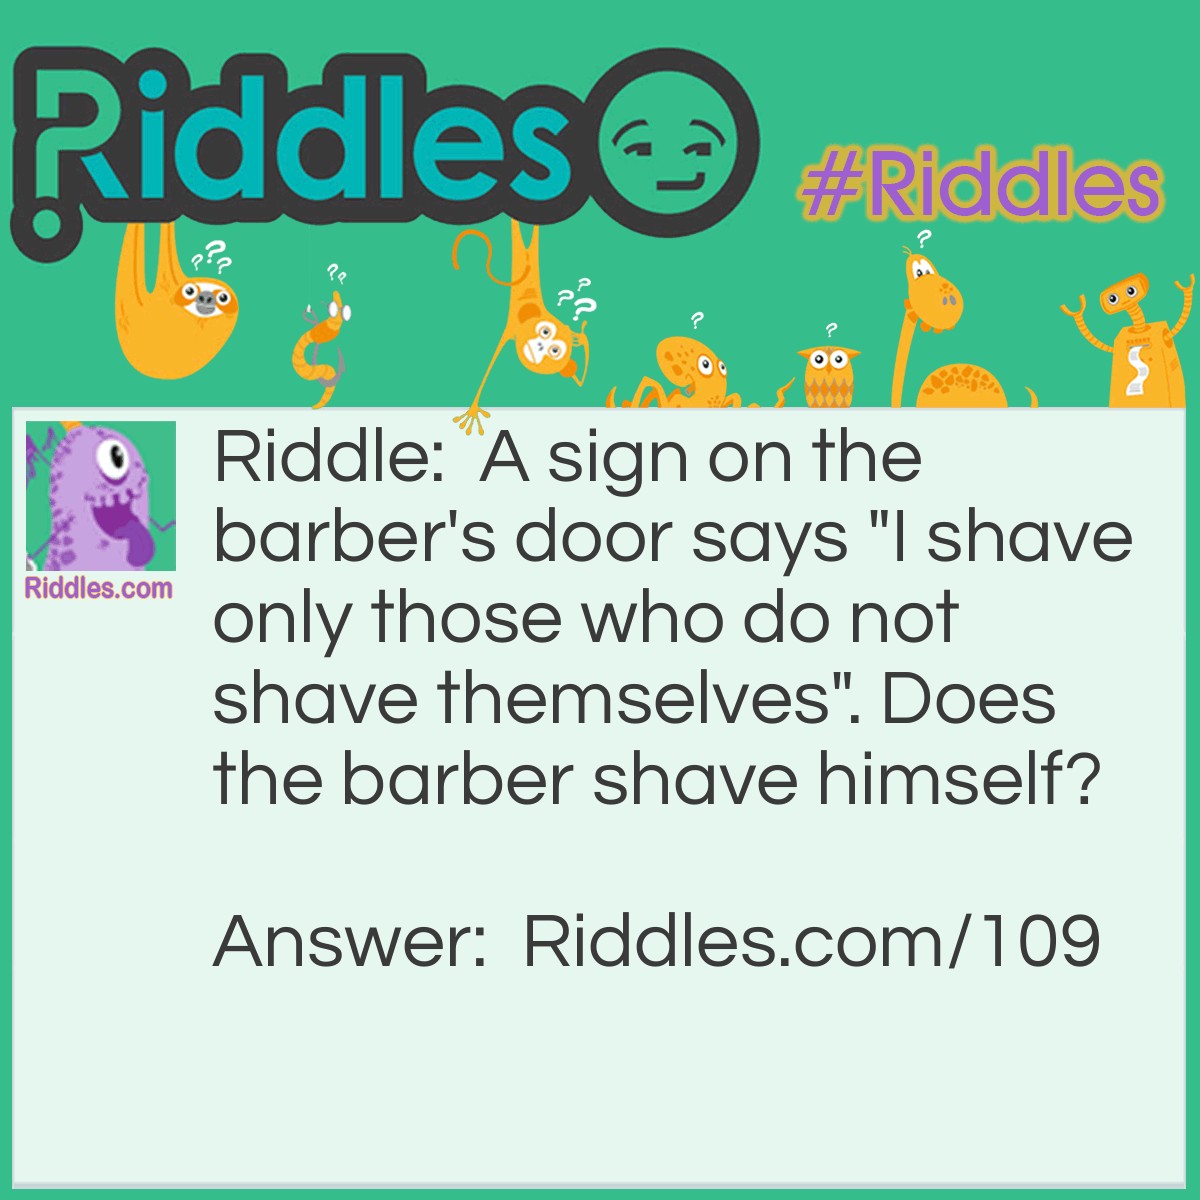 Riddle: A sign on the barber's door says "I shave only those who do not shave themselves". Does the barber shave himself? Answer: There is no answer; it's a paradox. It cannot be made to work.